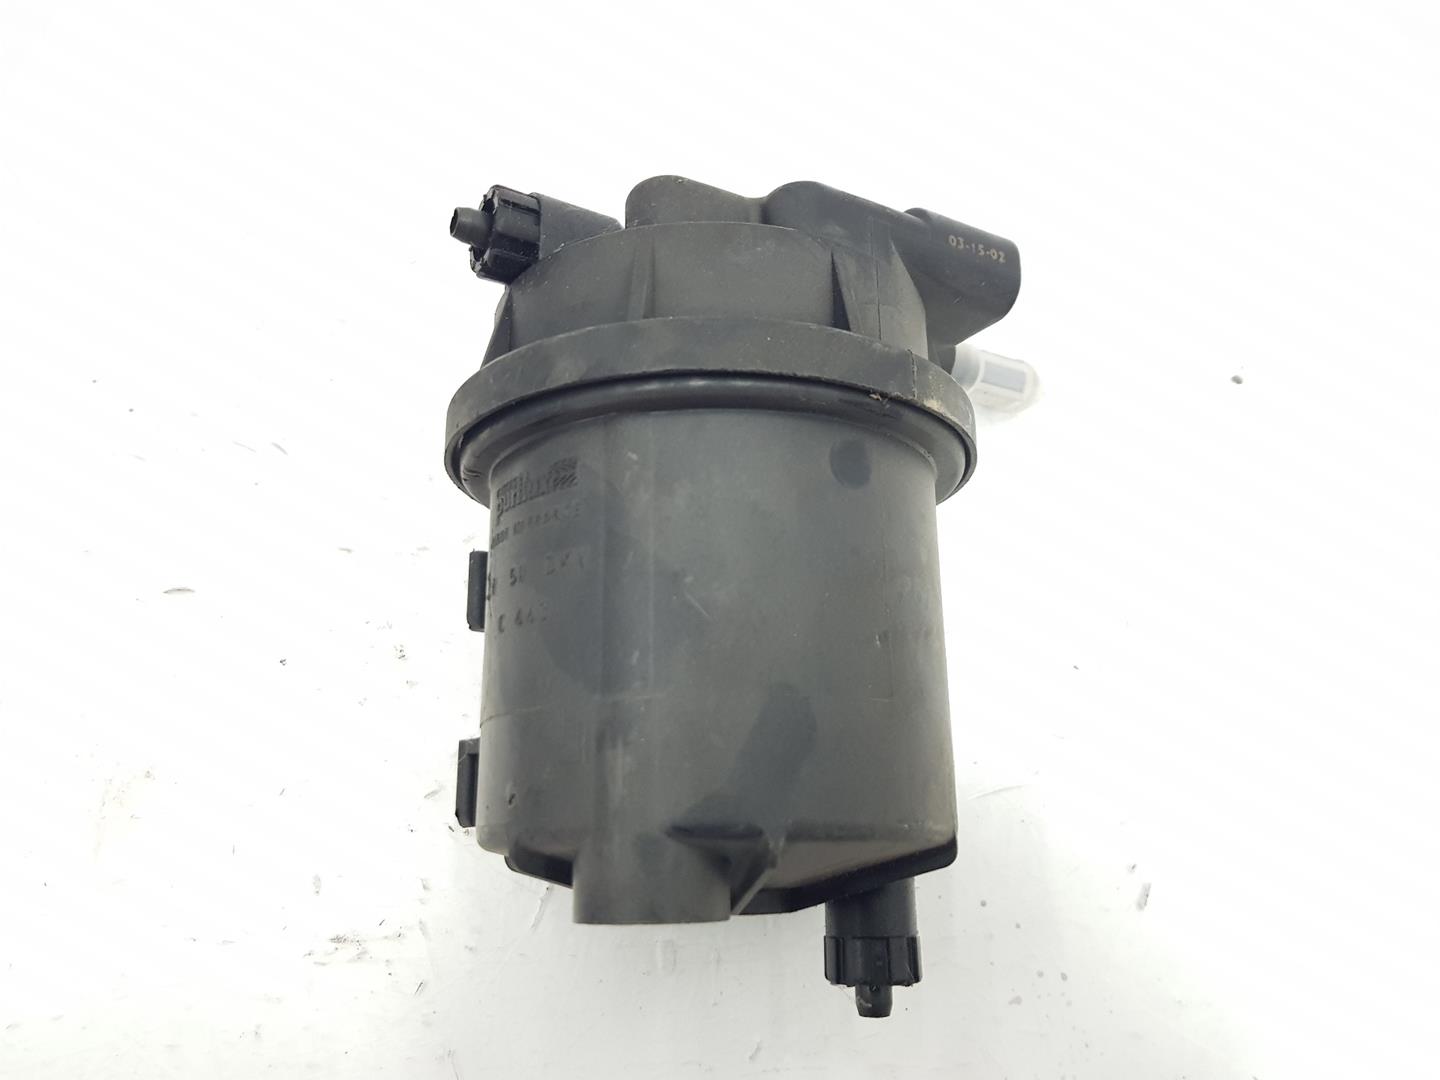 RENAULT Kangoo 1 generation (1998-2009) Other Engine Compartment Parts 7700116169, 6610964161 19808577